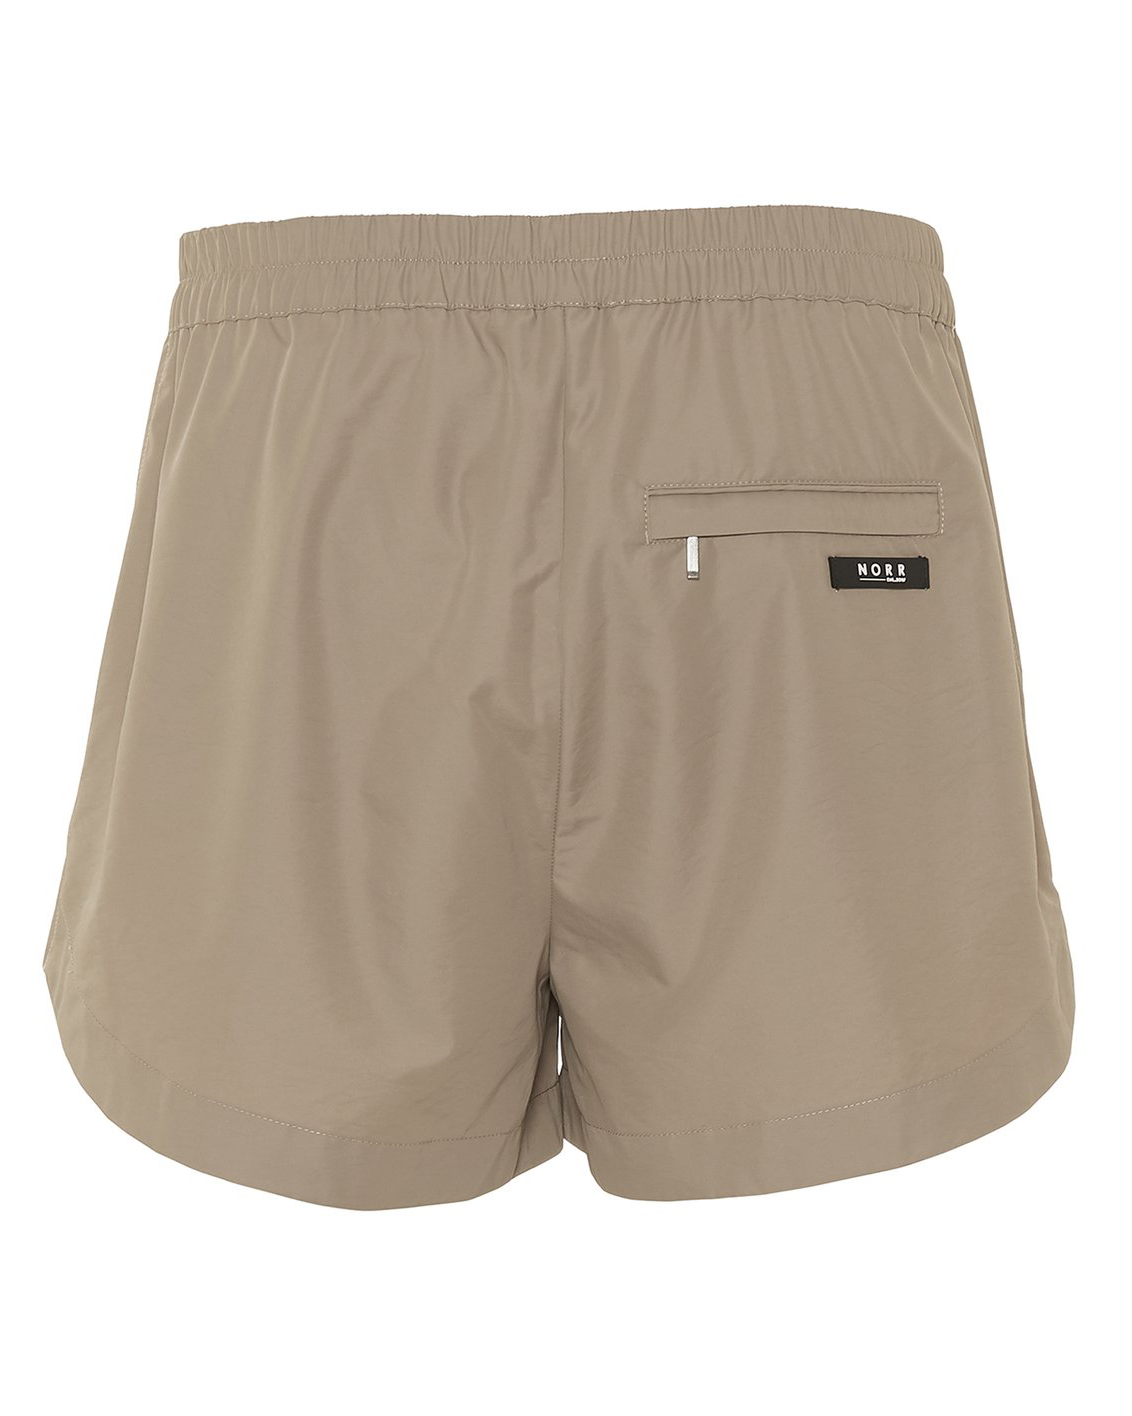 Coras shorts - Light brown - S